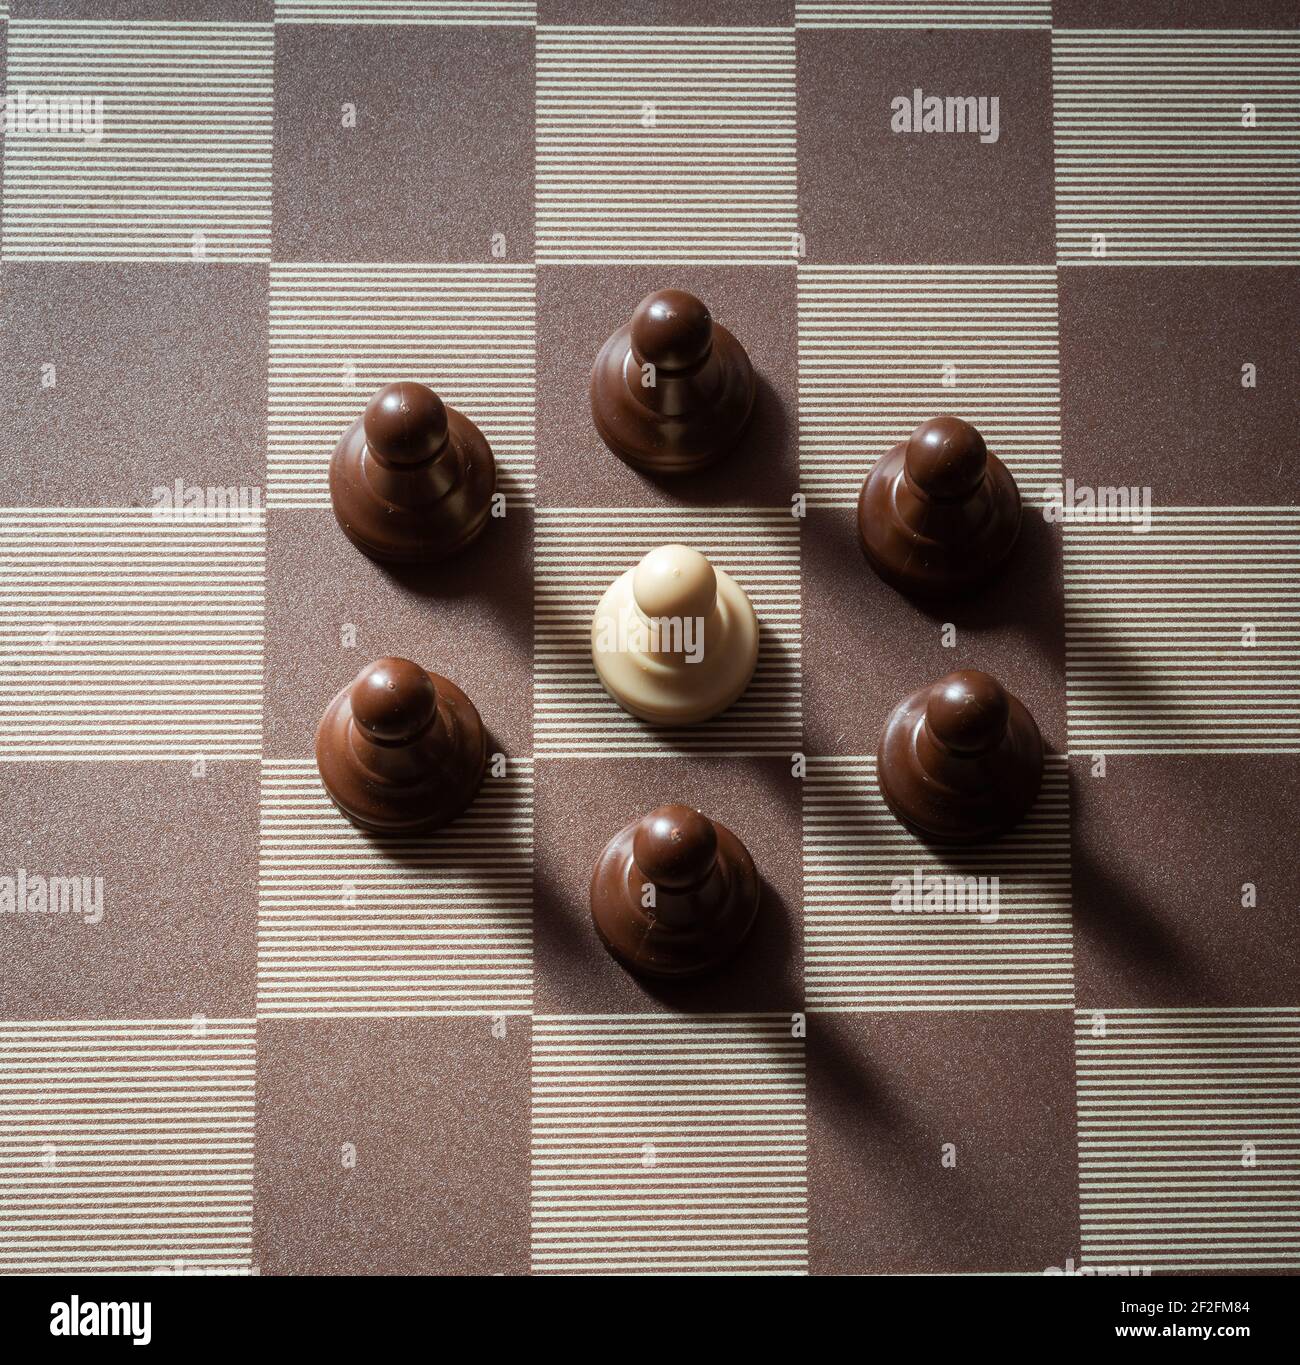 pawn on chess board surrounded by adversary concept of adversity ,discimination ,equality . Stock Photo